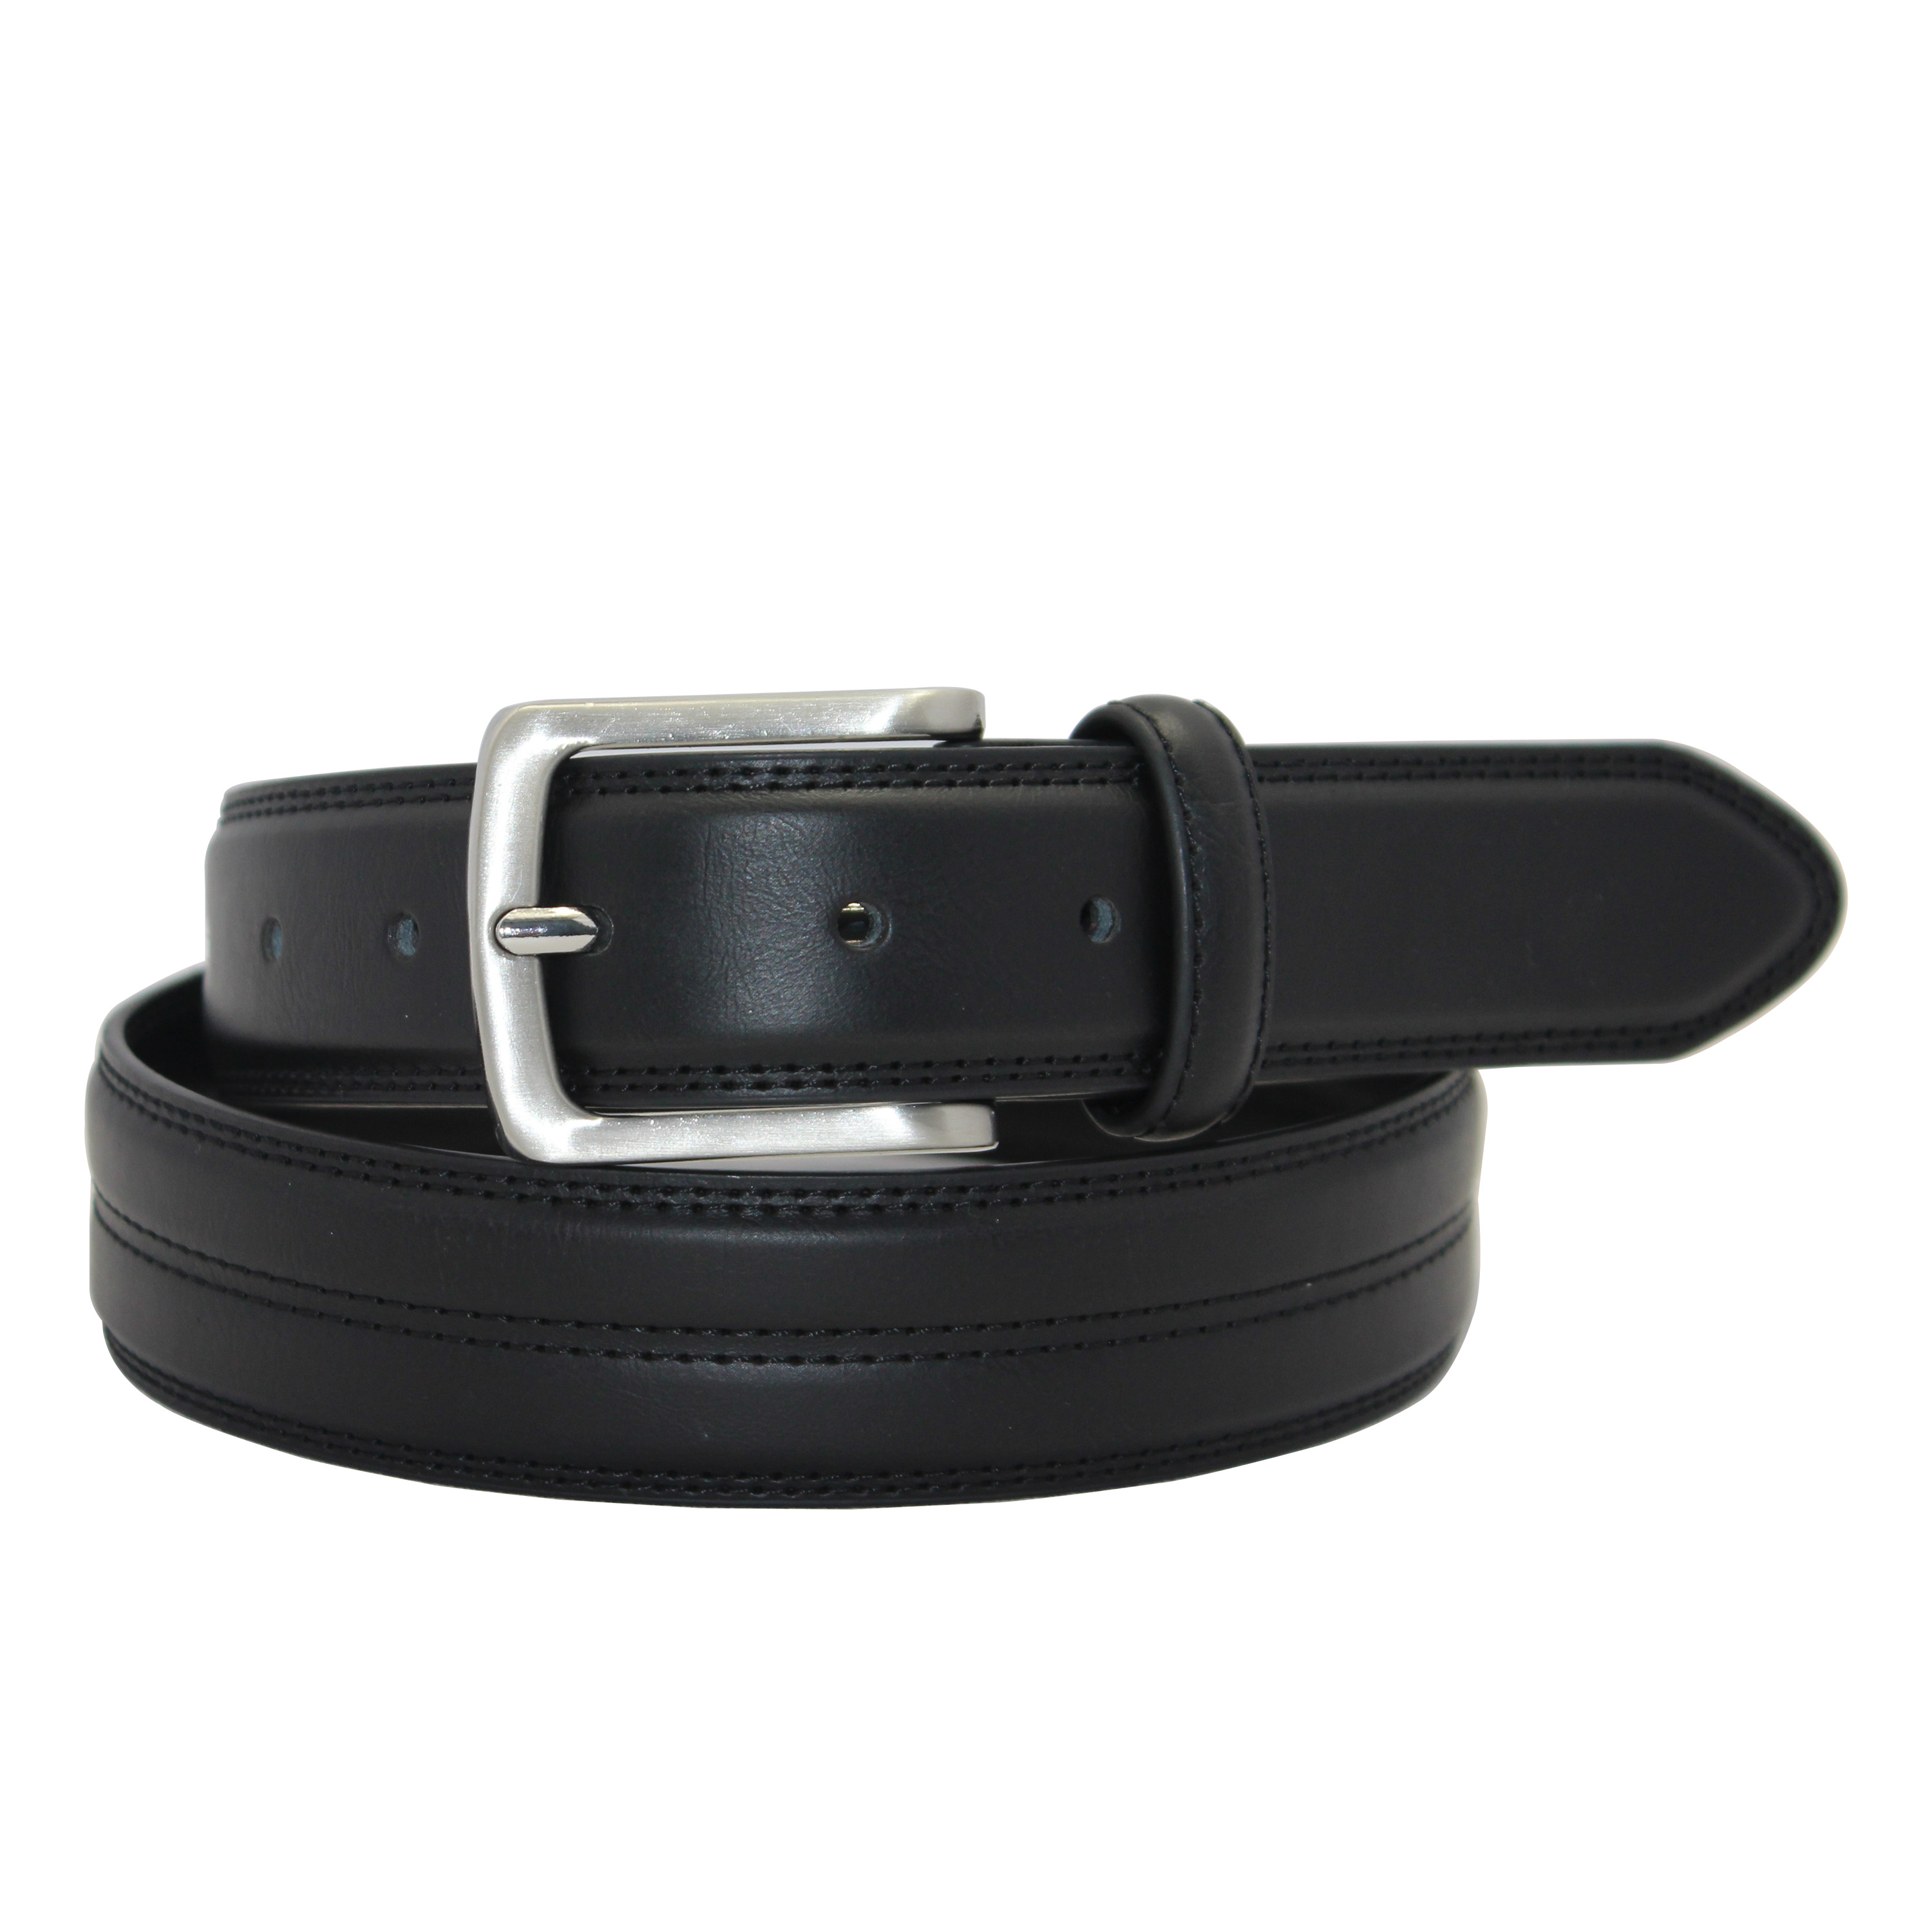 Discover Your Favorite <a href='/casual-belt/'>Casual Belt</a> Styles Here 35-23450